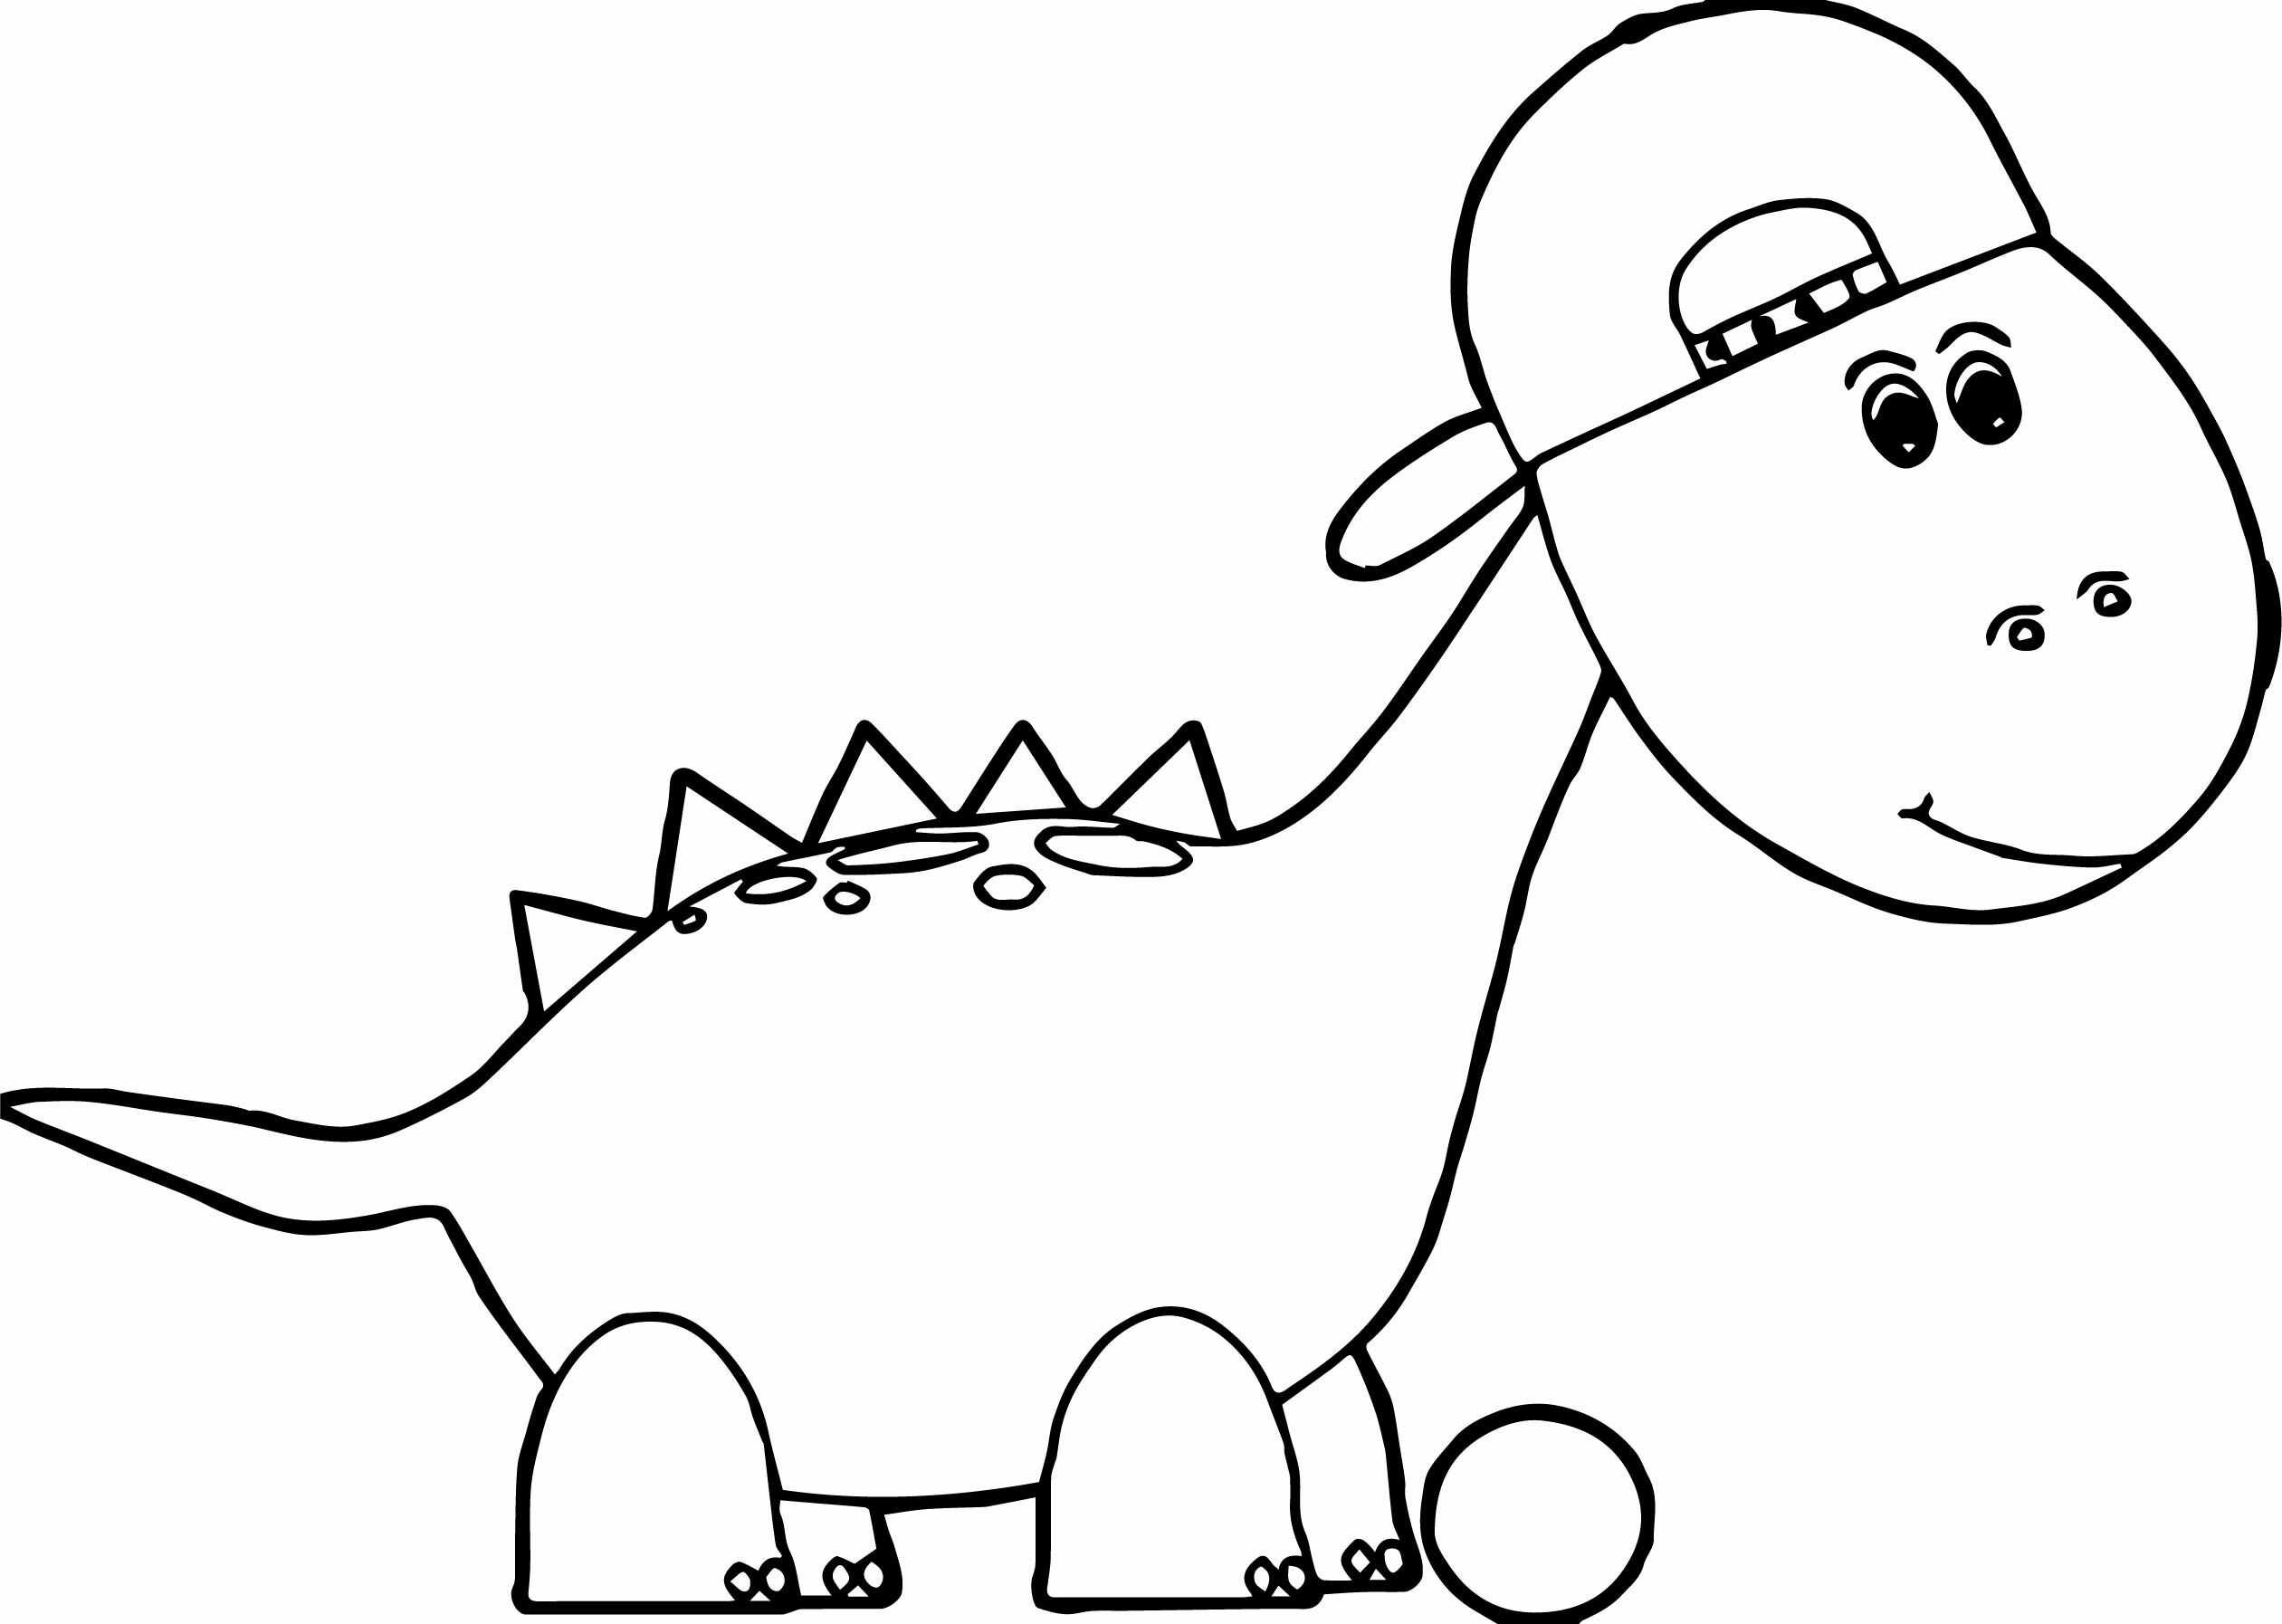 Cute Dinosaur wearing a cap Coloring Page